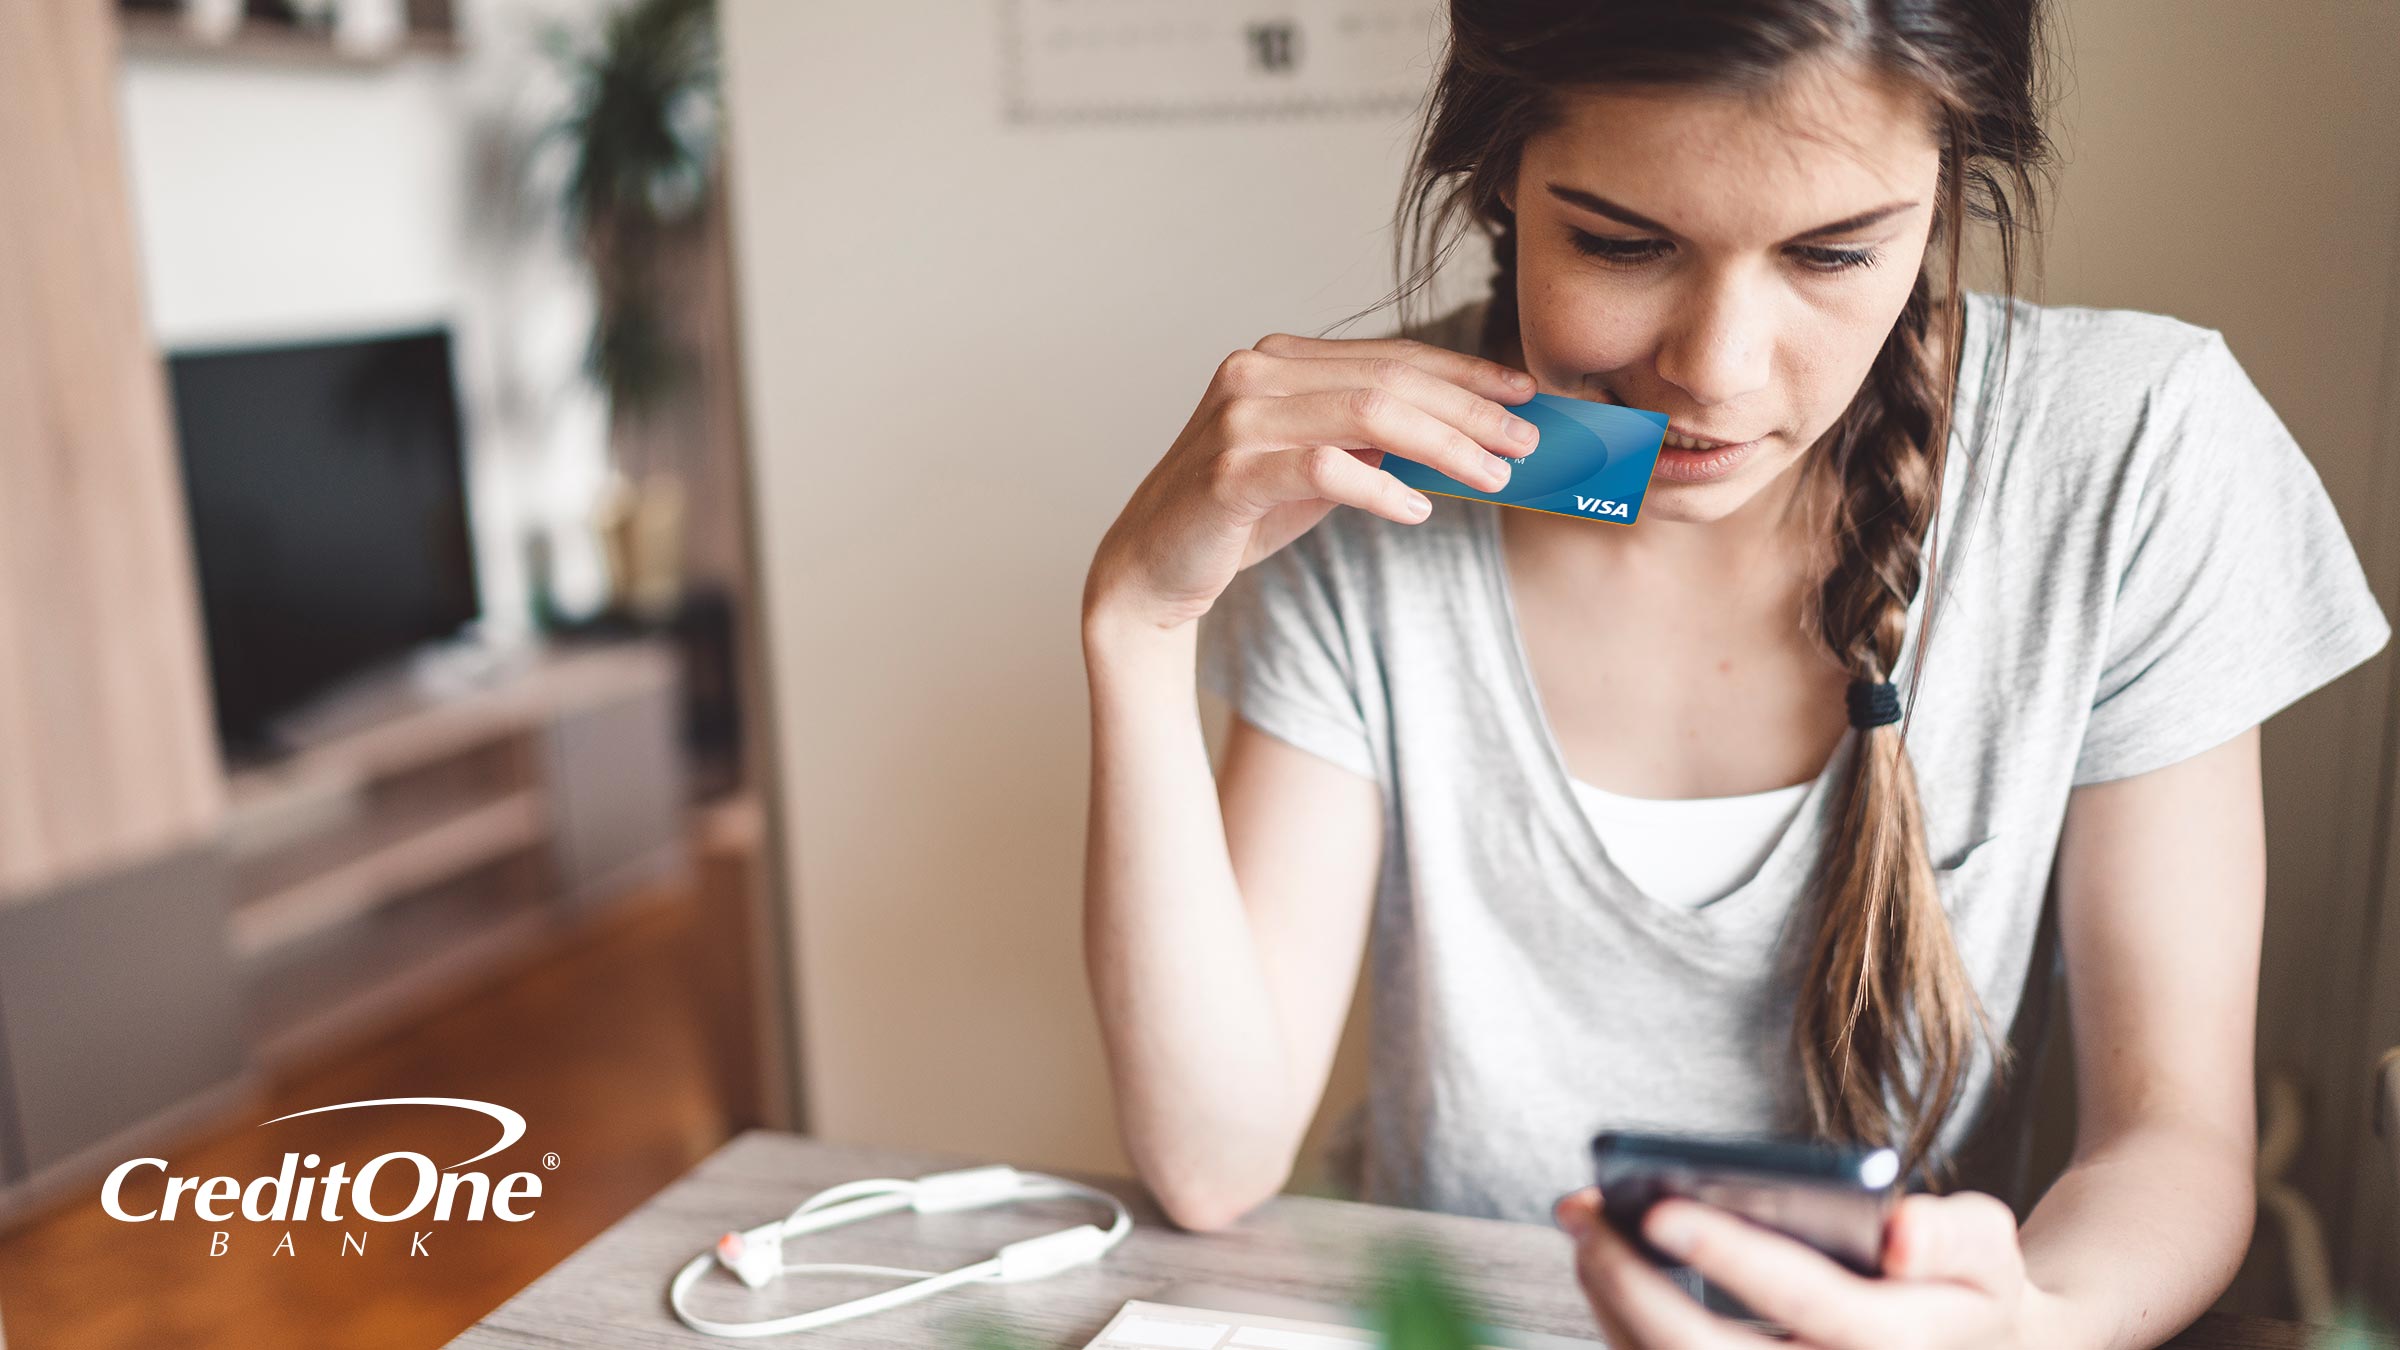 Seated young woman gently biting a credit card while looking at her smart phone